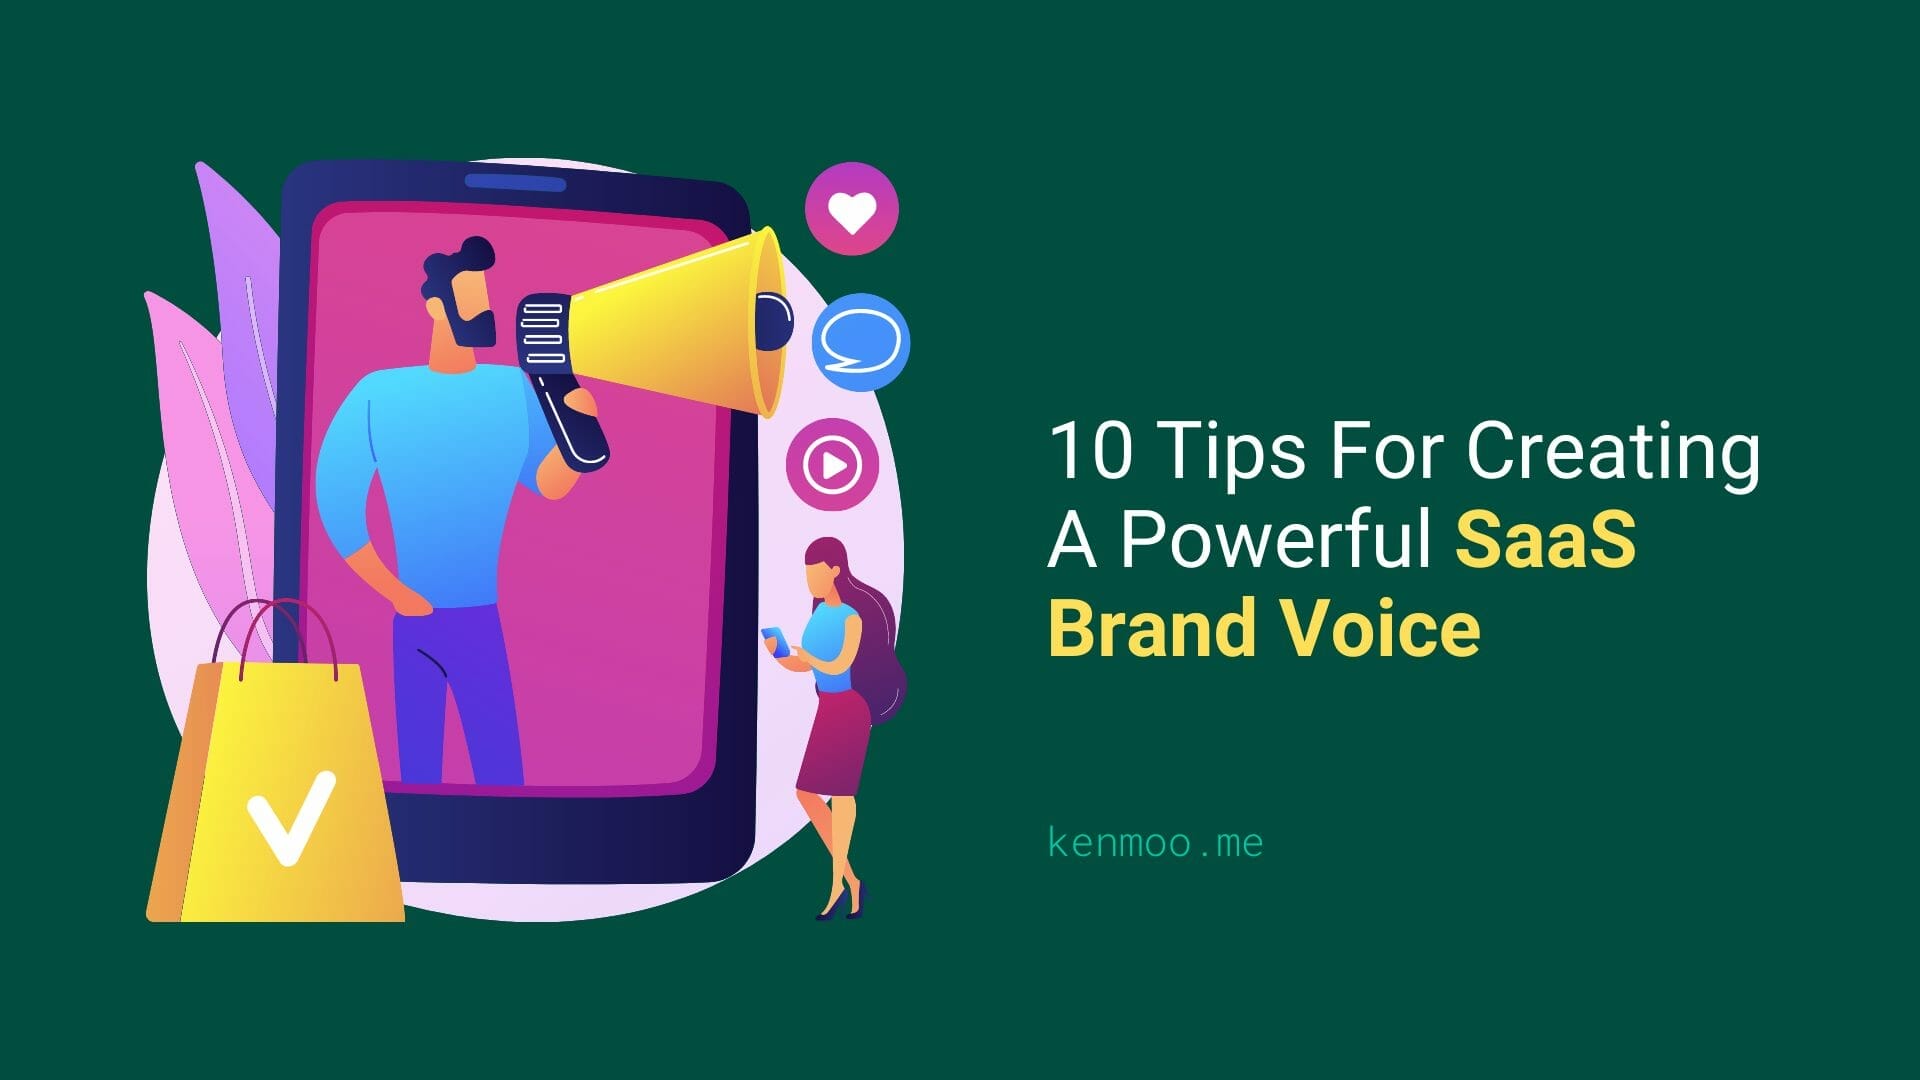 10 Tips For Creating A Powerful SaaS Brand Voice